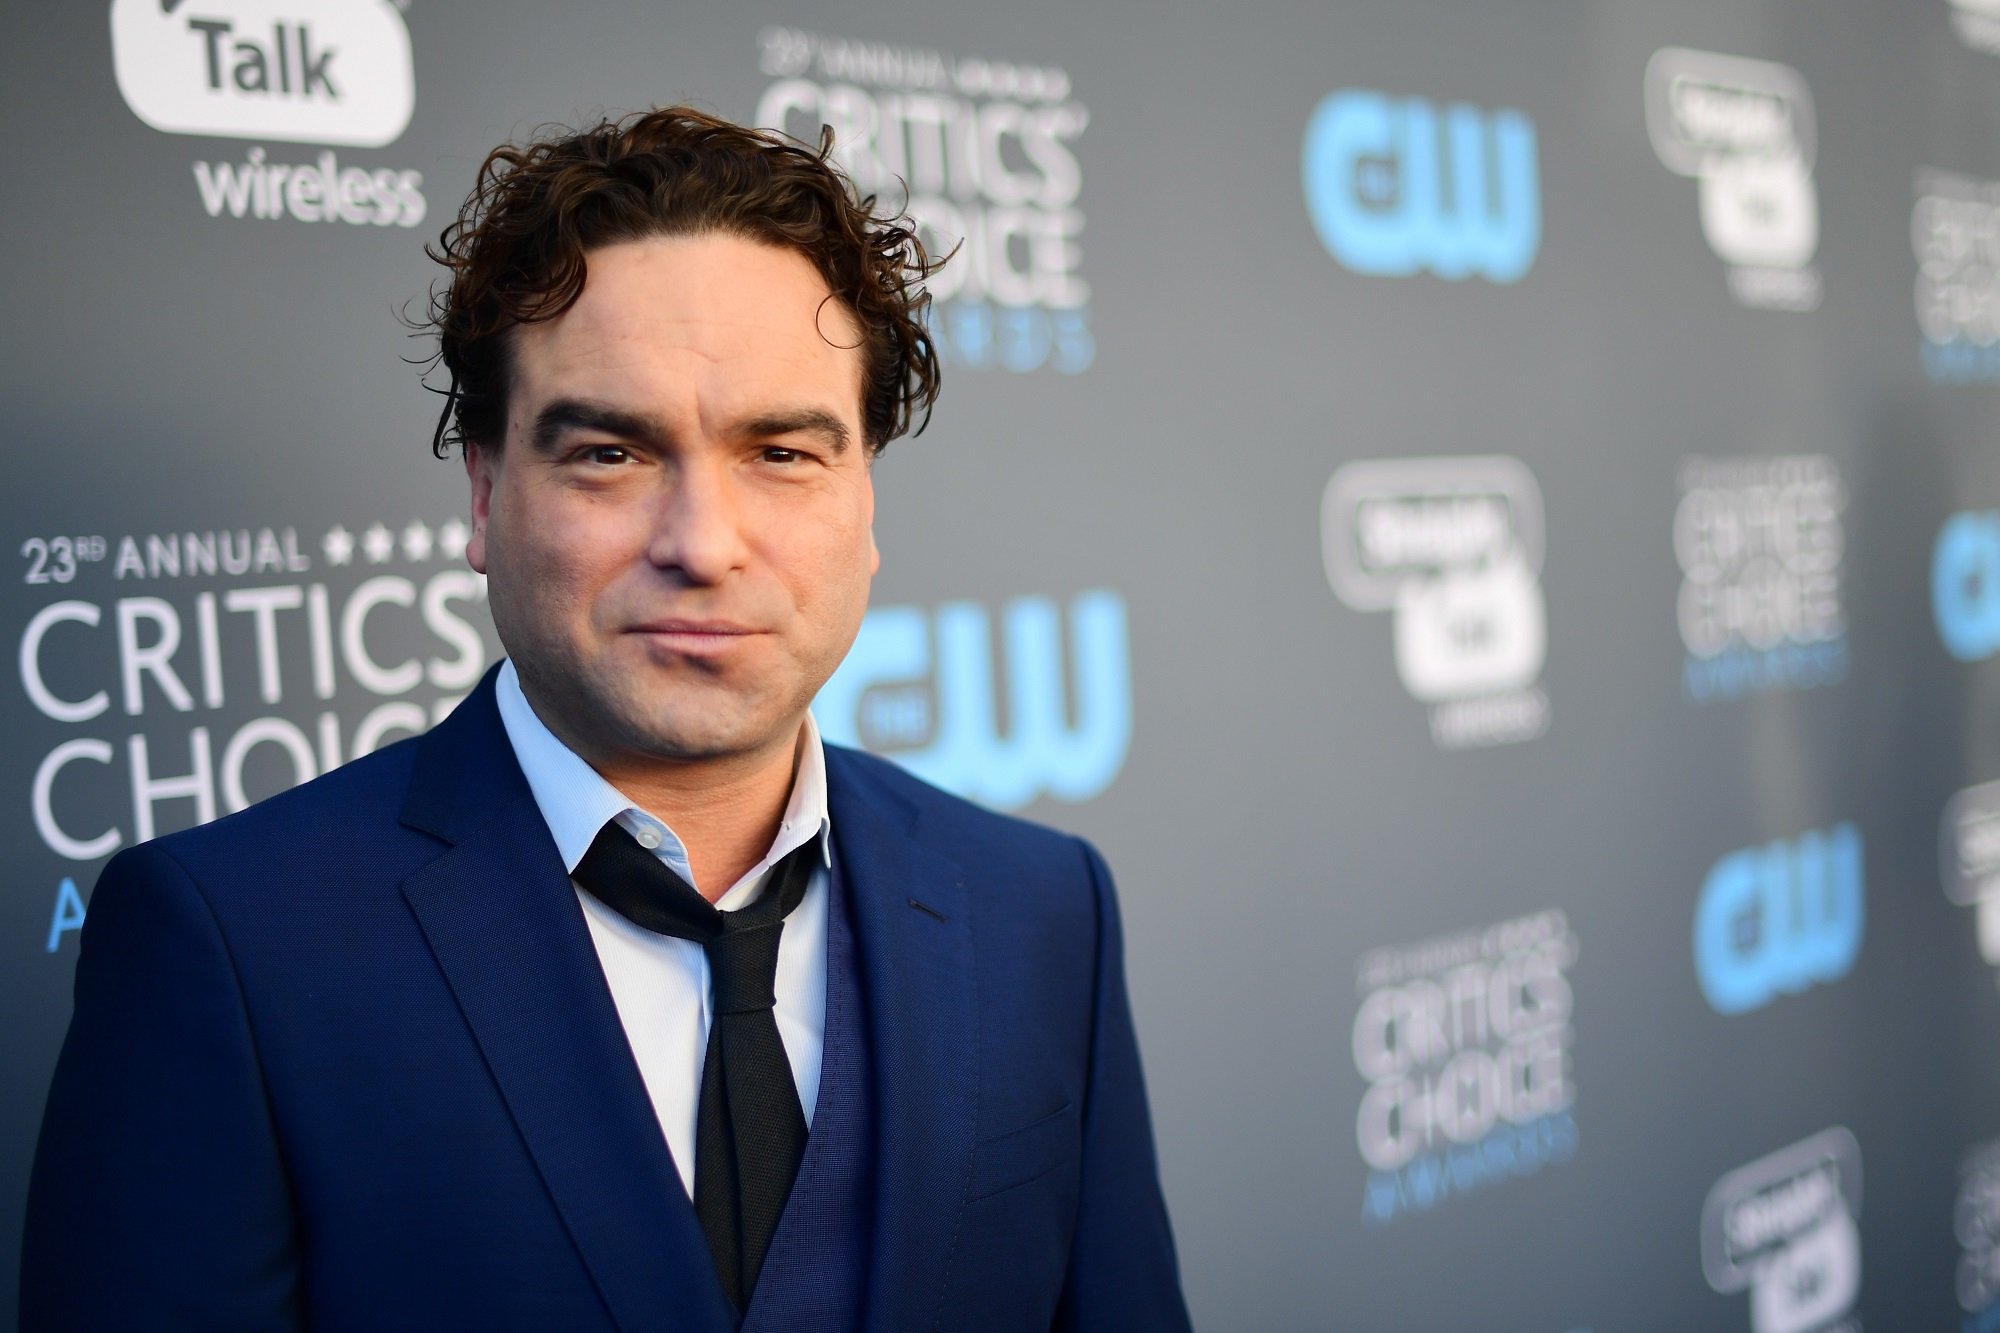 Johnny Galecki attends The 23rd Annual Critics' Choice Awards on January 11, 2018 in Santa Monica, California.